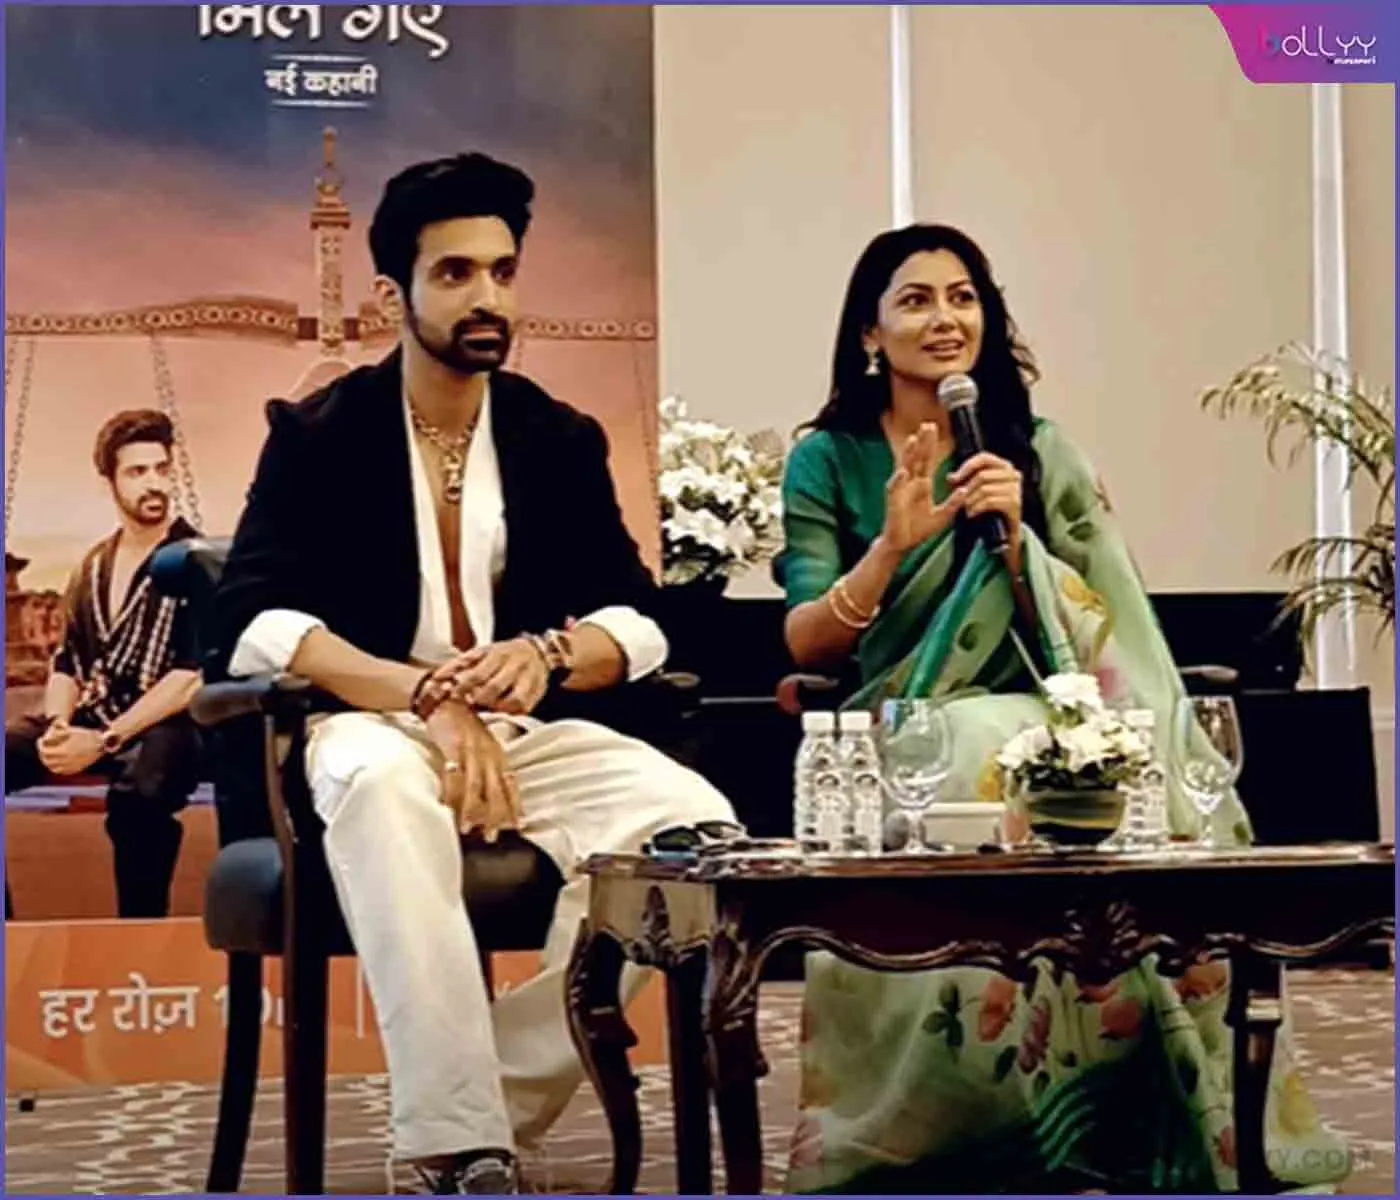 Arjit and Sriti in Delhi for press meet in delhi for their recently launched show Kaise Mujhe Tum Mil Gaye (2)